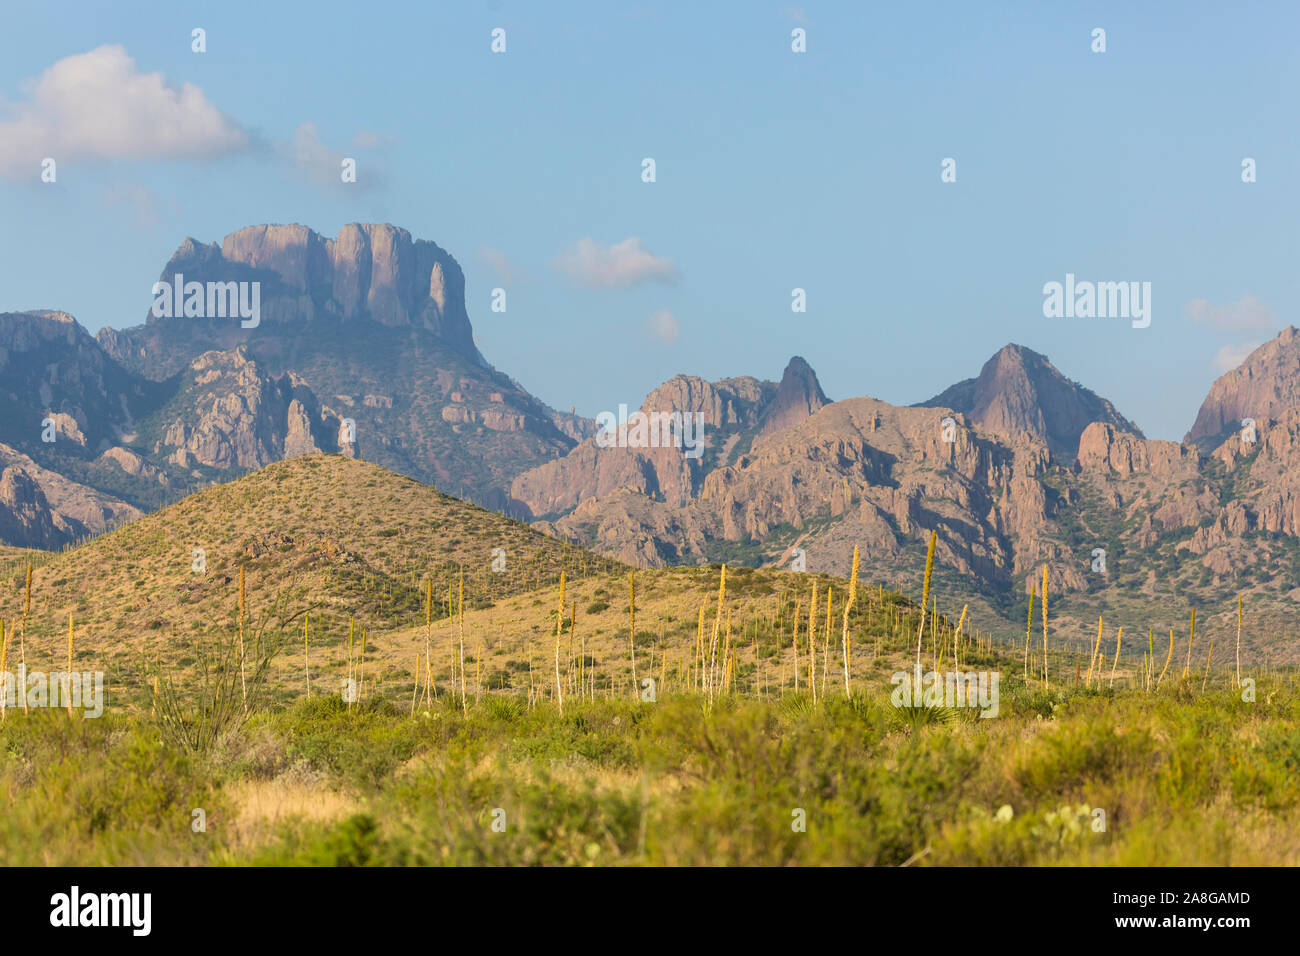 Landscape view of Big Bend National Park near the Chisos Basin during sunset in Texas. Stock Photo